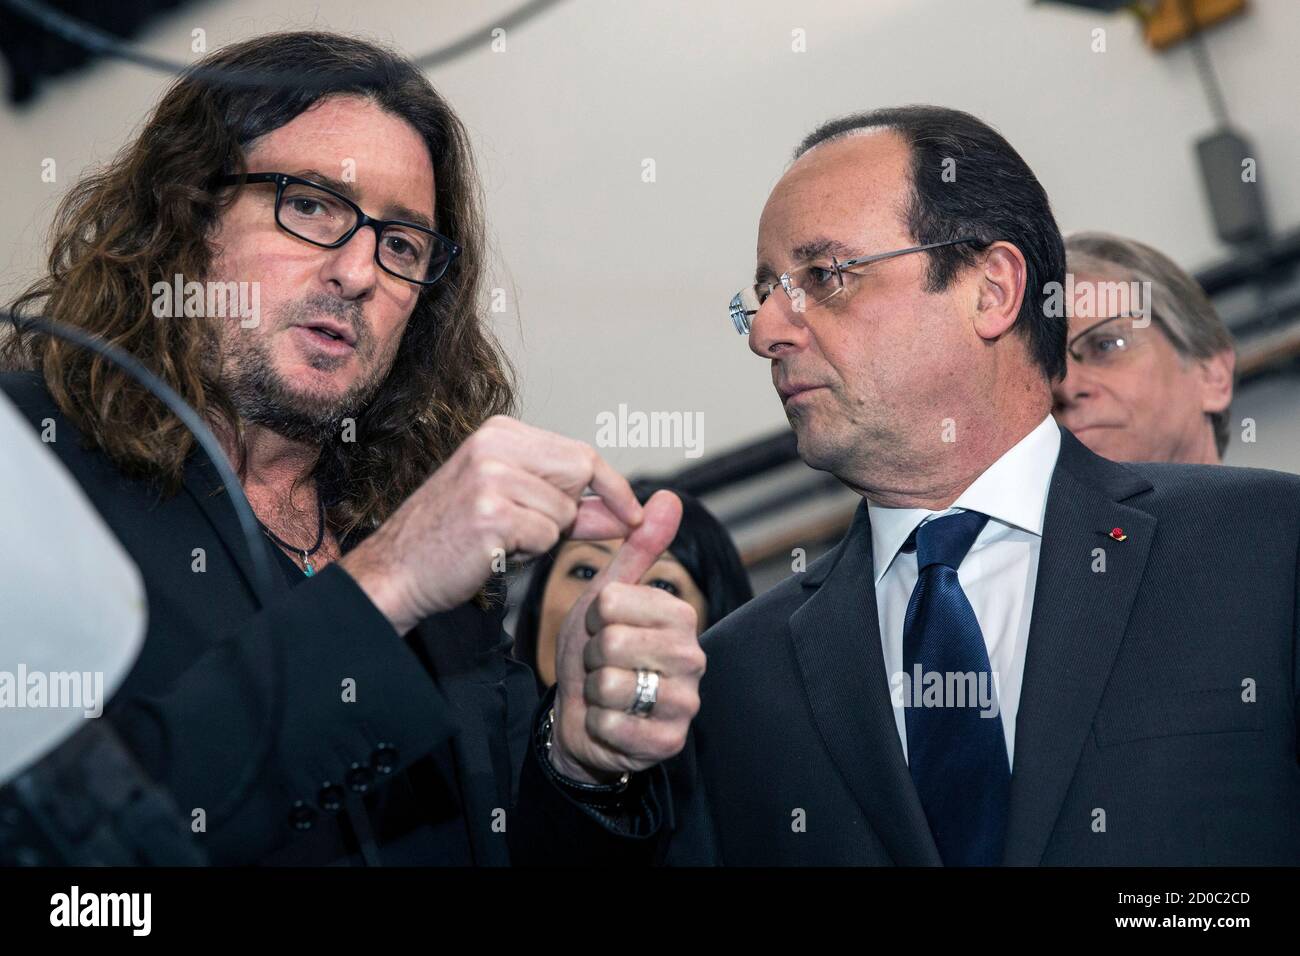 Jacques-Antoine Granjon (L), the founder and CEO of Vente-Privee.com,  escorts French President Francois Hollande during a visit to its  headquarter in Paris, France, February 6, 2014. REUTERS/Etienne  Laurent/Pool (FRANCE - Tags: BUSINESS